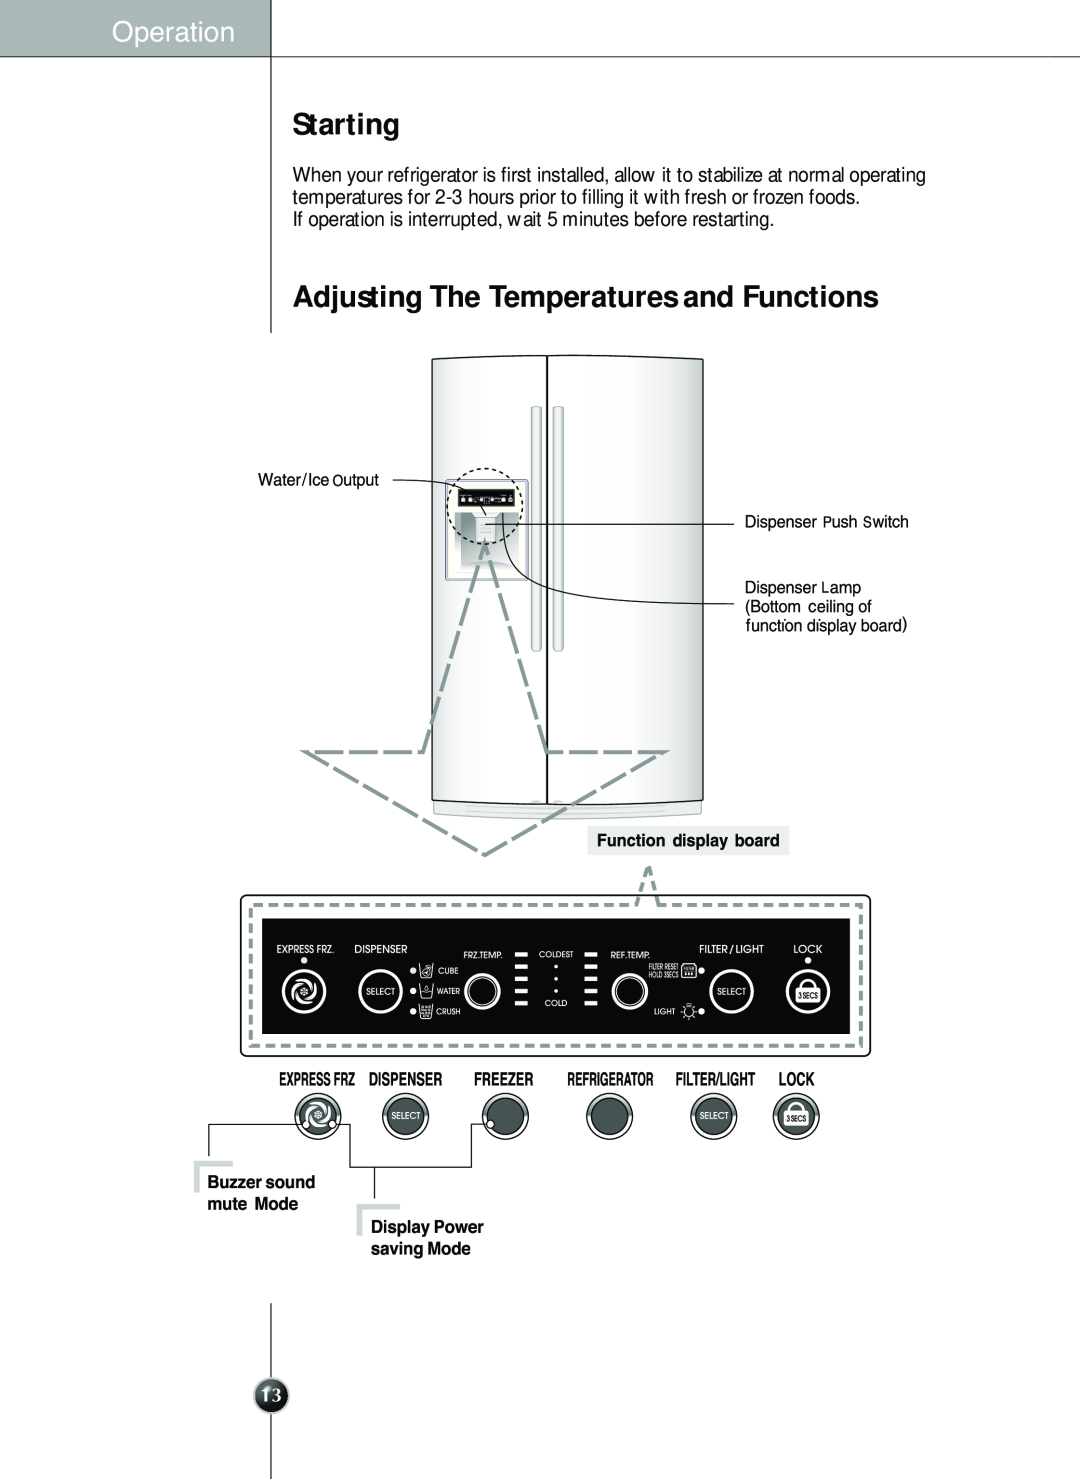 LG Electronics LSC 26905TT manual muteMode, Starting, Adjusting The Temperatures and Functions, Operation, DisplayPower 